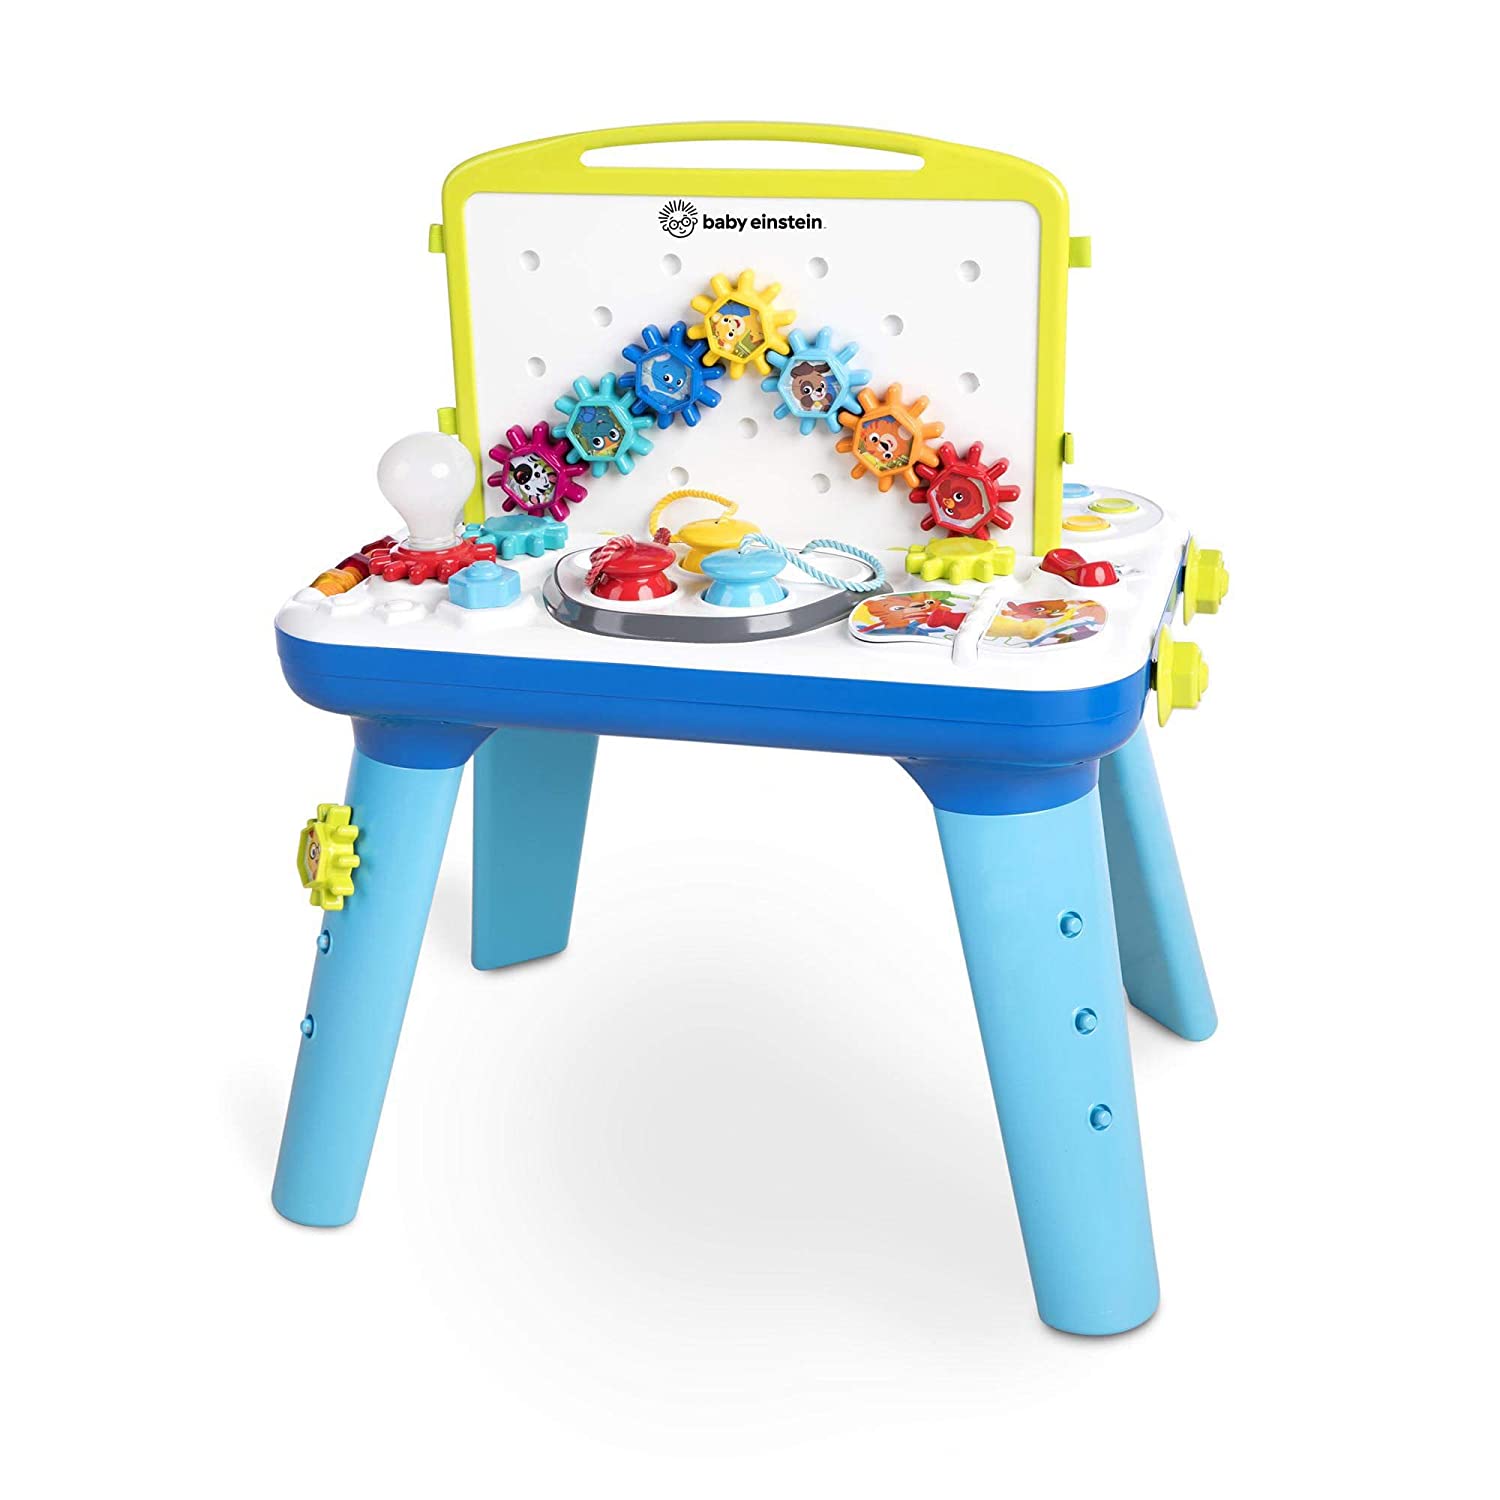 Baby Einstein Curiosity Table Activity Station Table Toddler Toy w/ Lights and Music $50 + Free Shipping